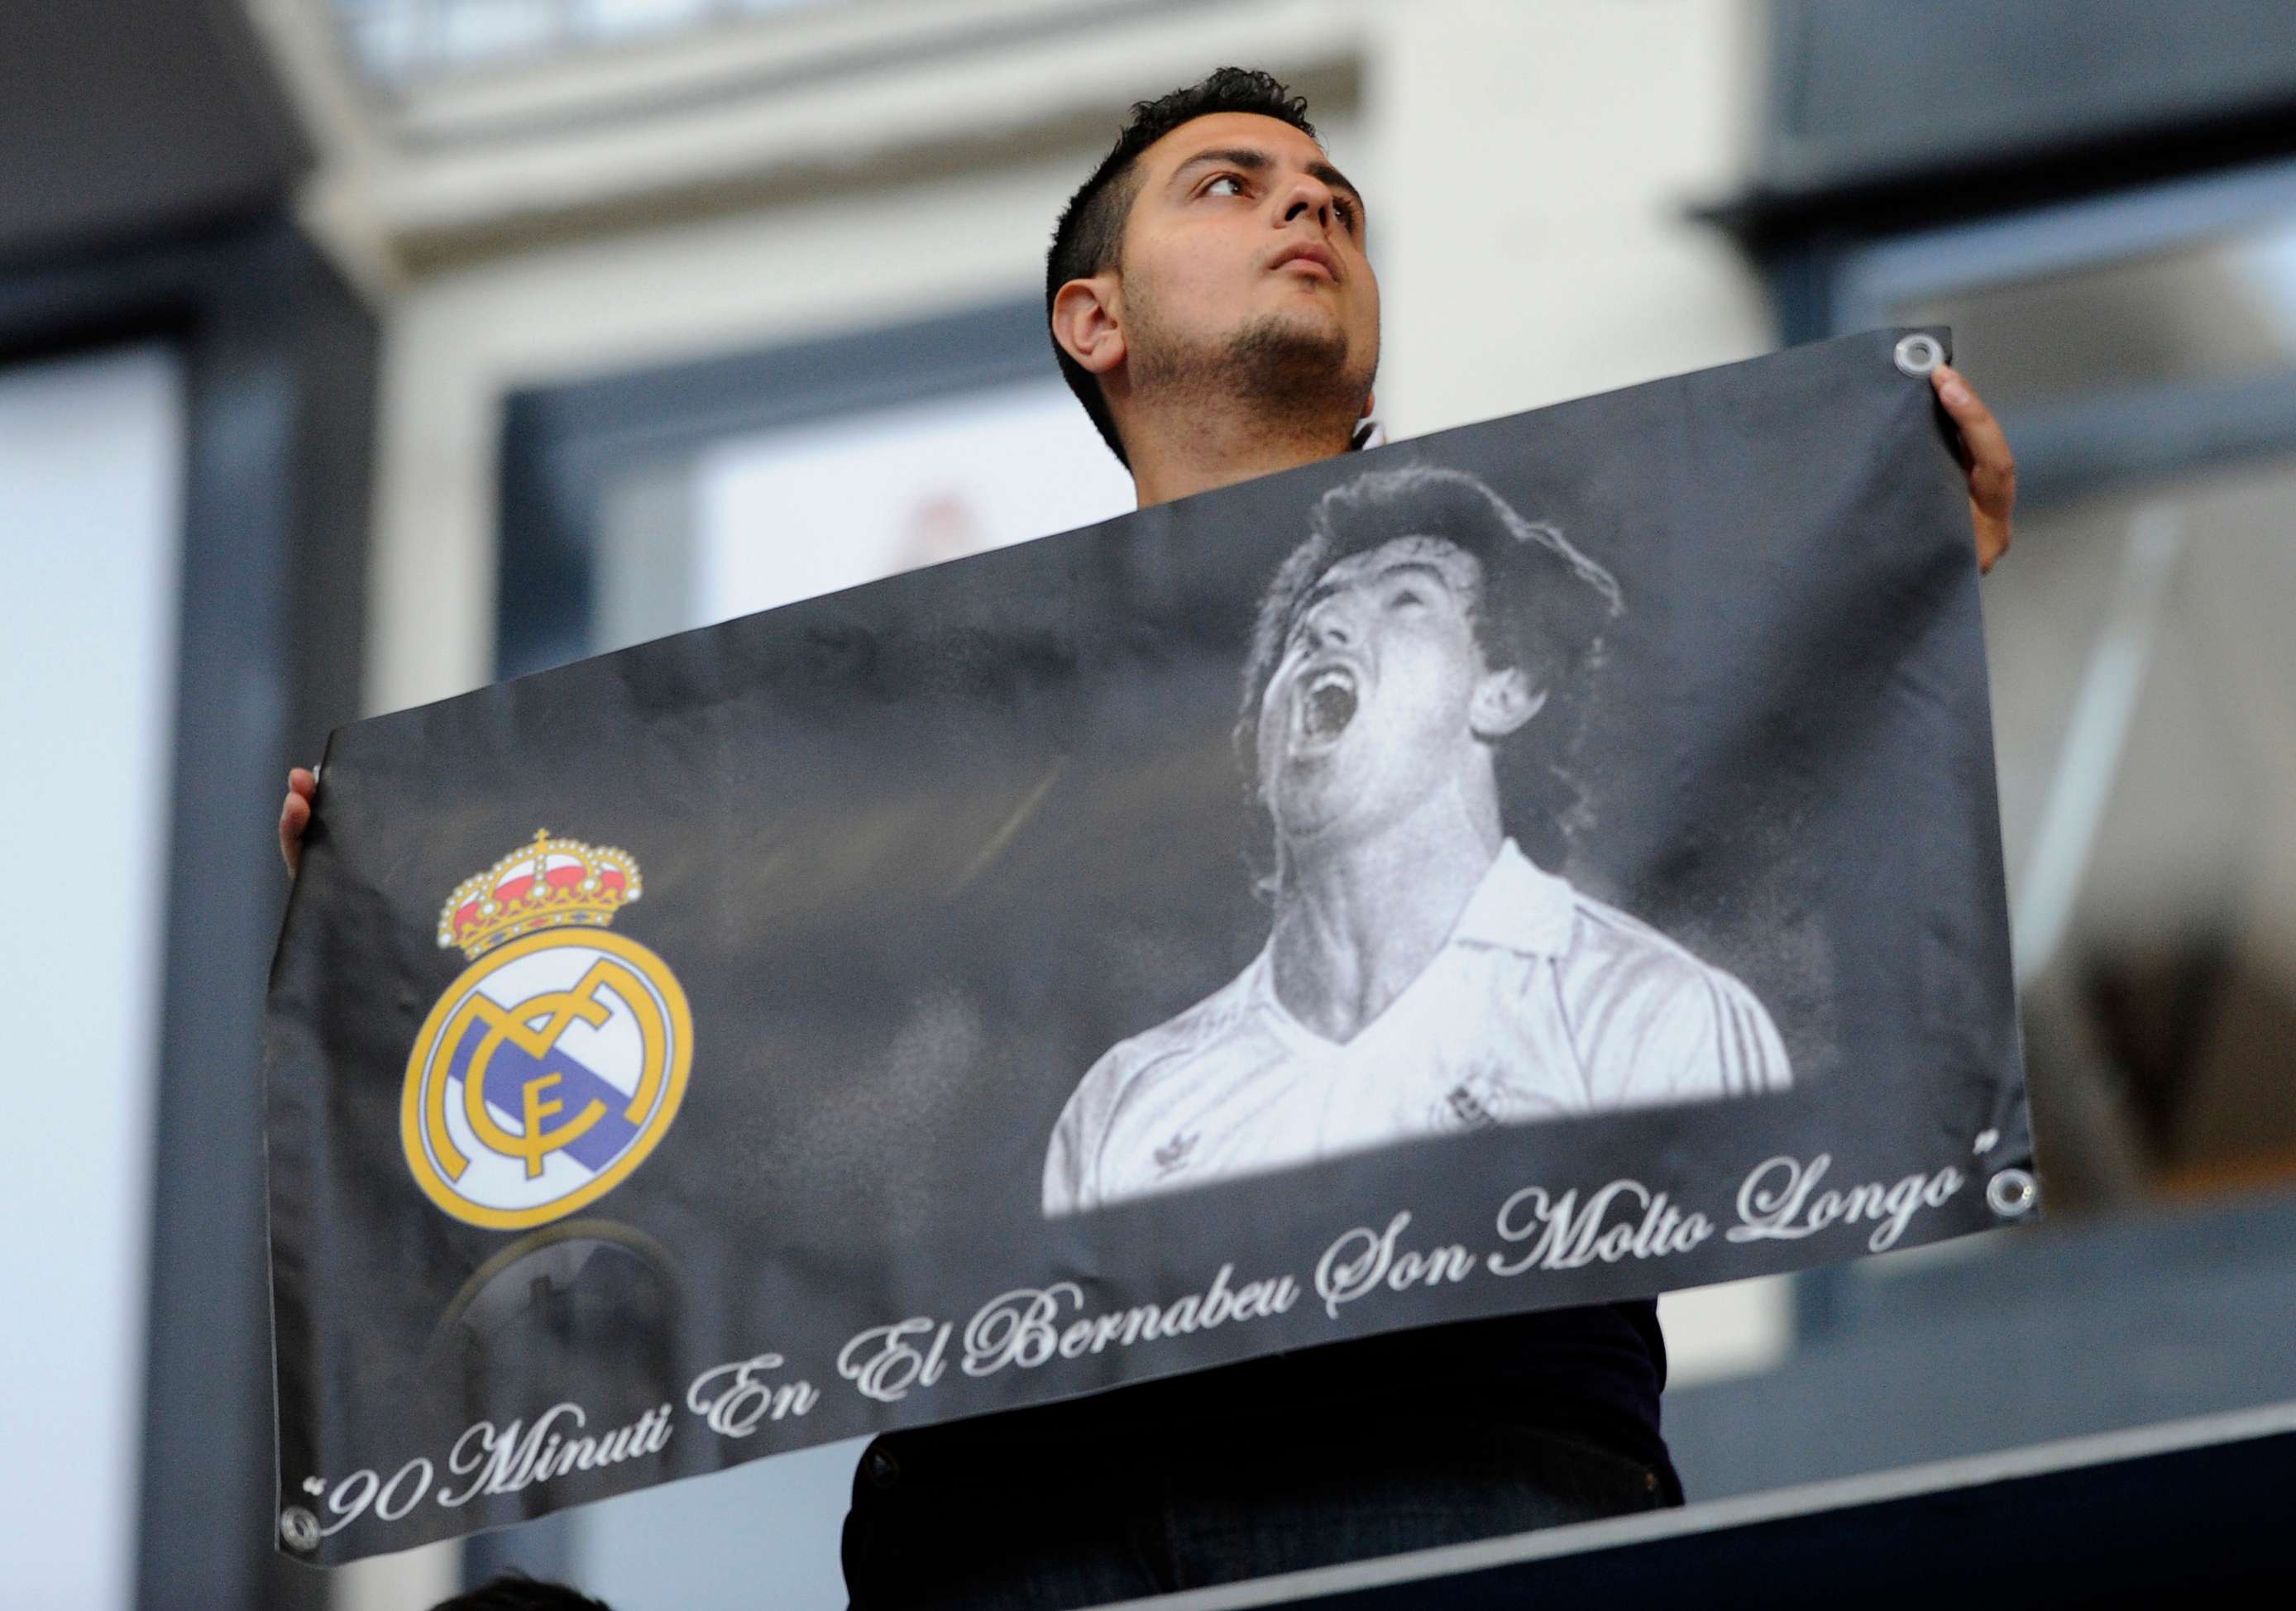 A supporter of Real Madrid holds a banner depicting late Real Madrid's forward Juan Gomez Gonzalez  Juanito